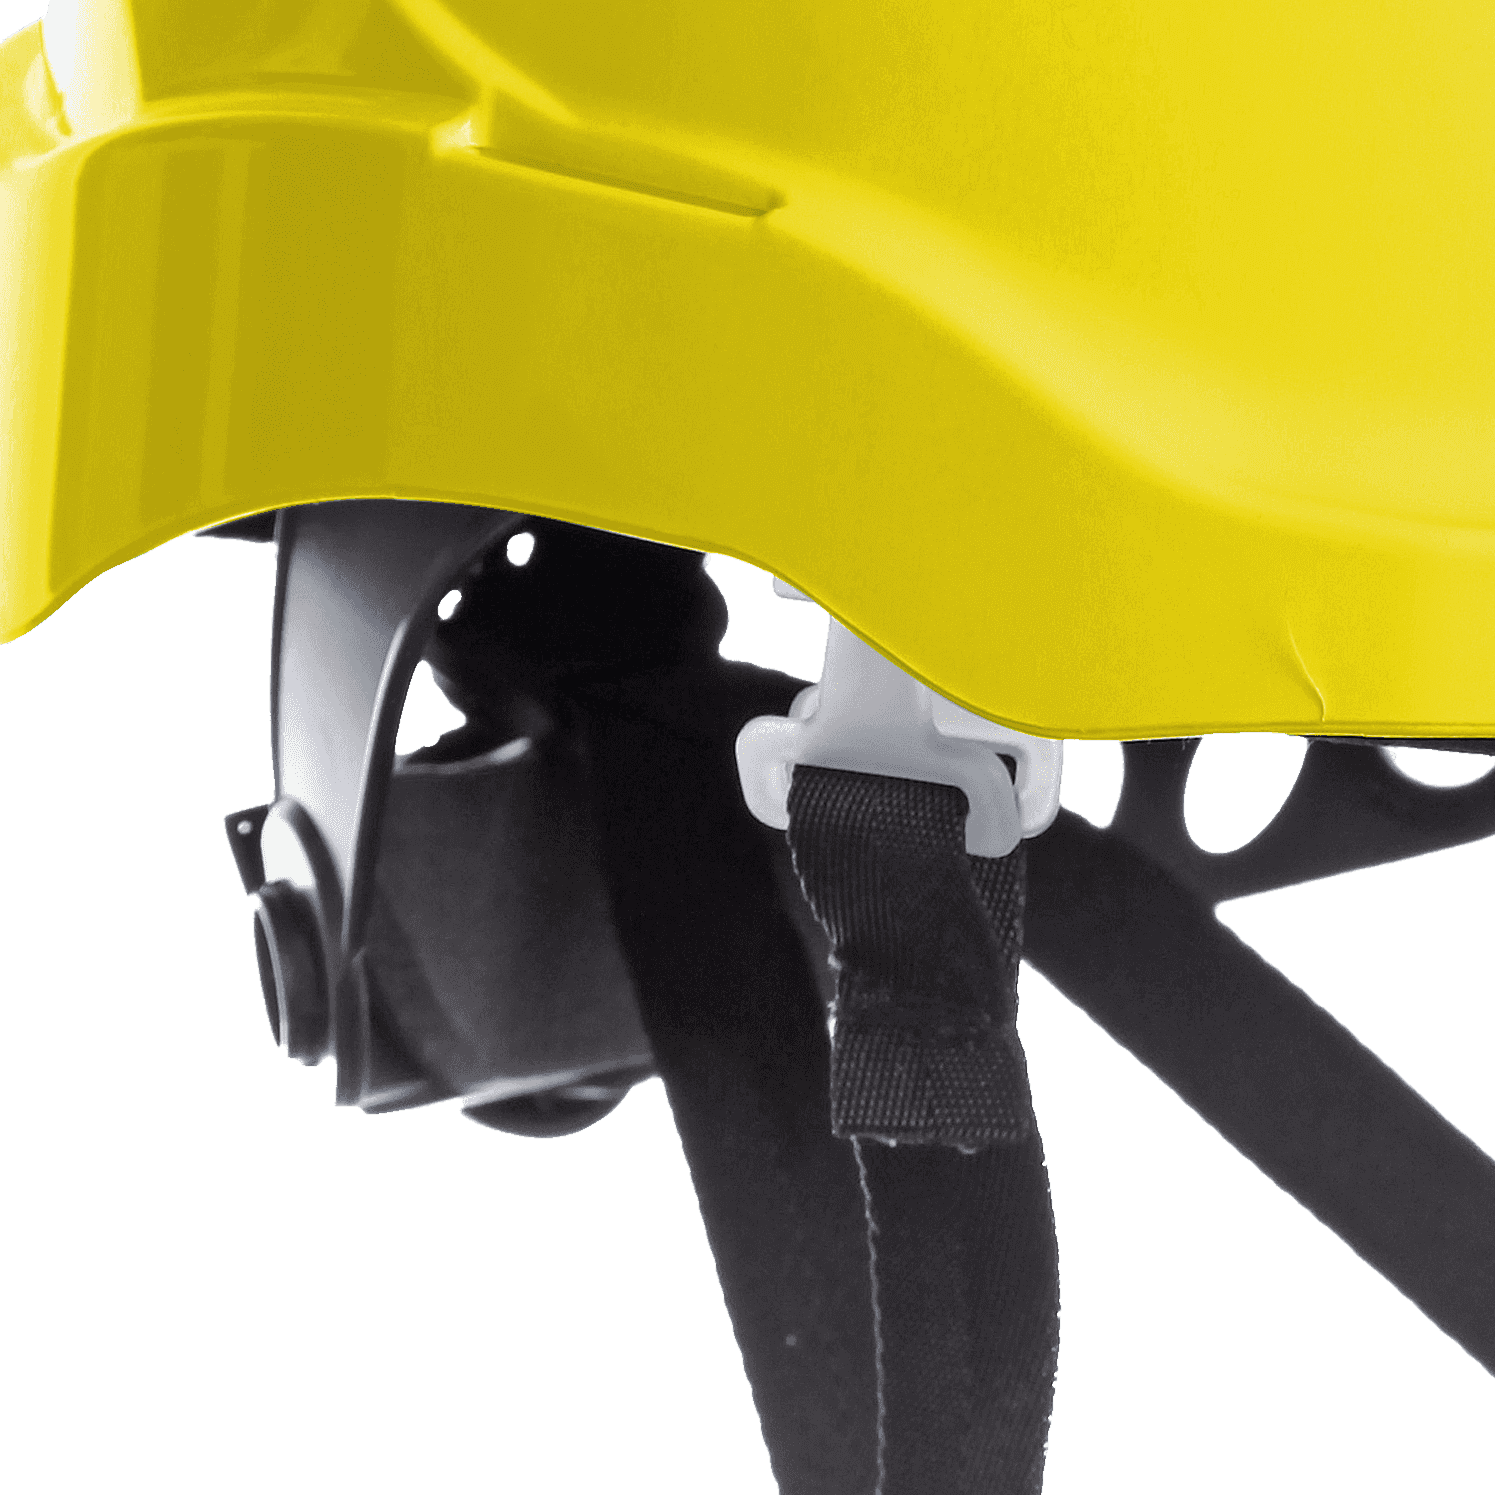 Curro Safety Helmet with Chin Strap